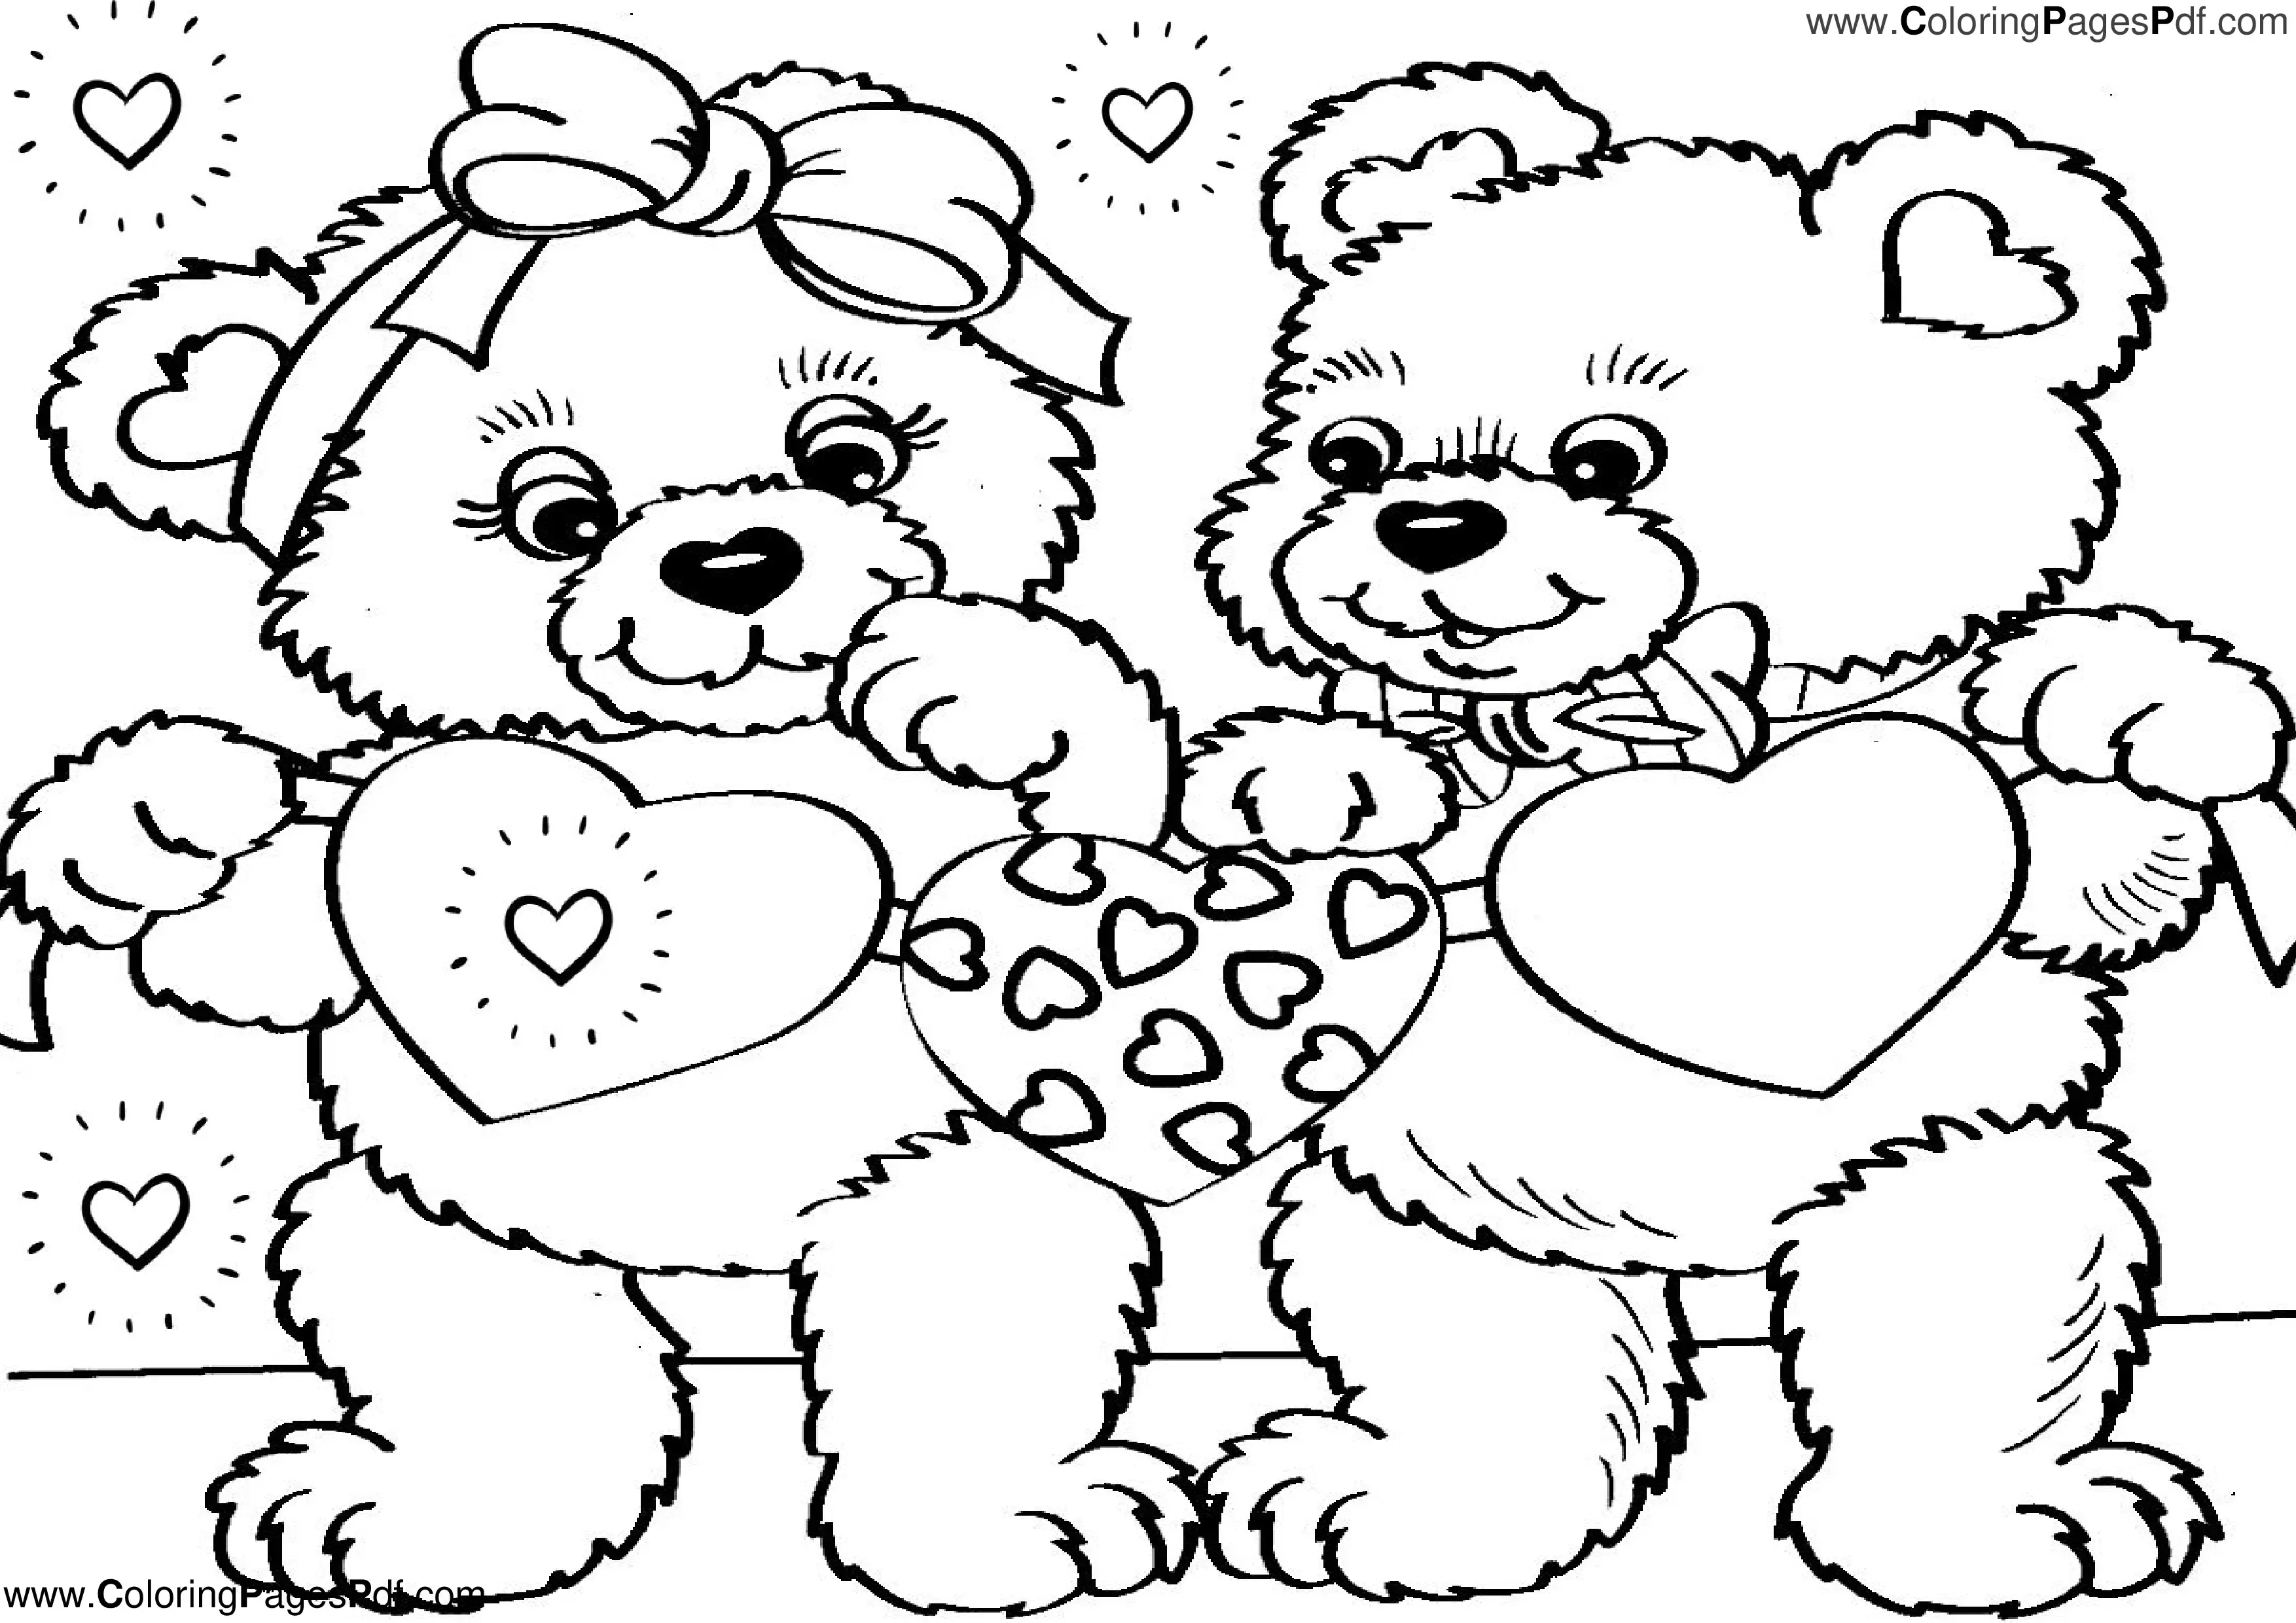 Teddy bear coloring pages printable